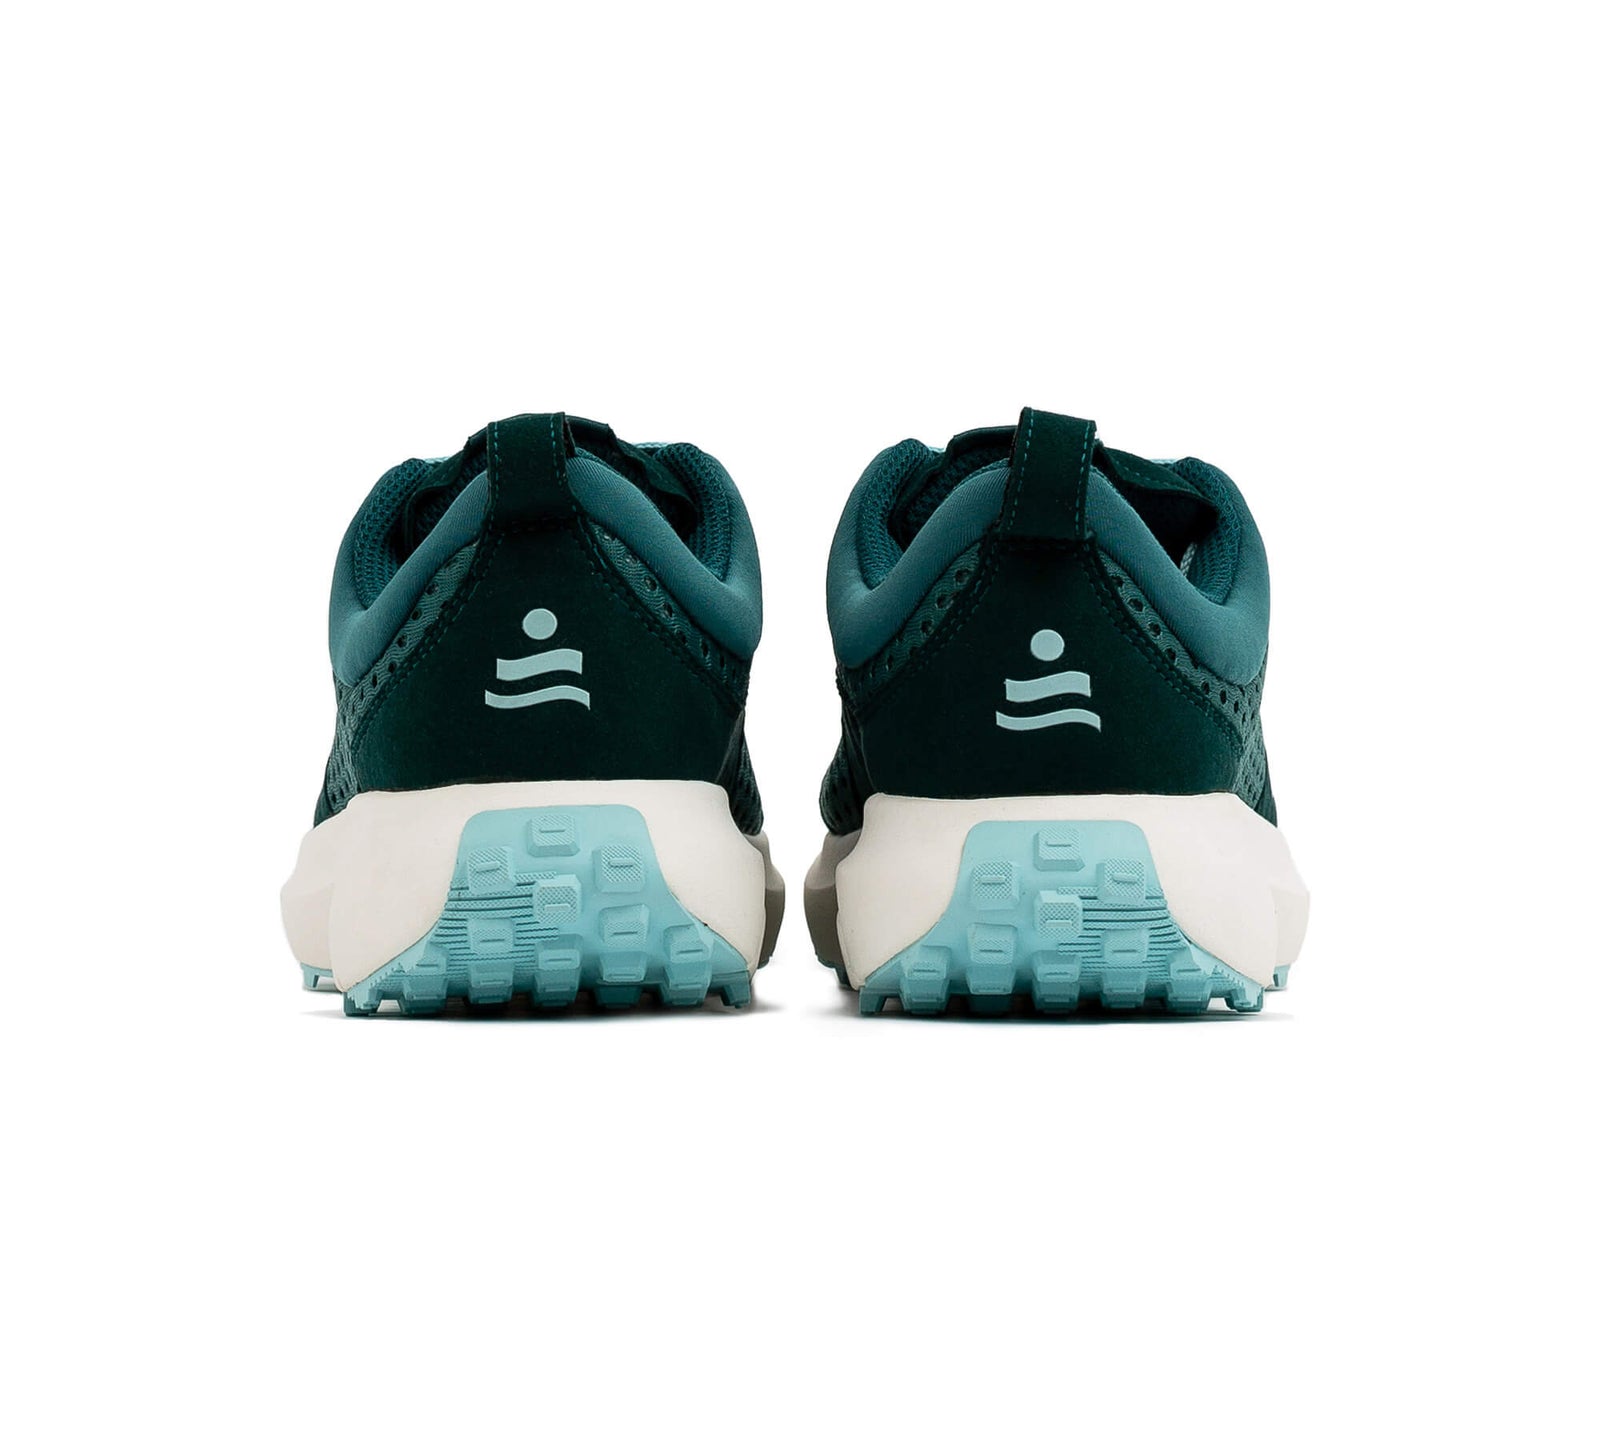 Back view of a pair of the Everywhere Hilma Running shoe in Evergreen